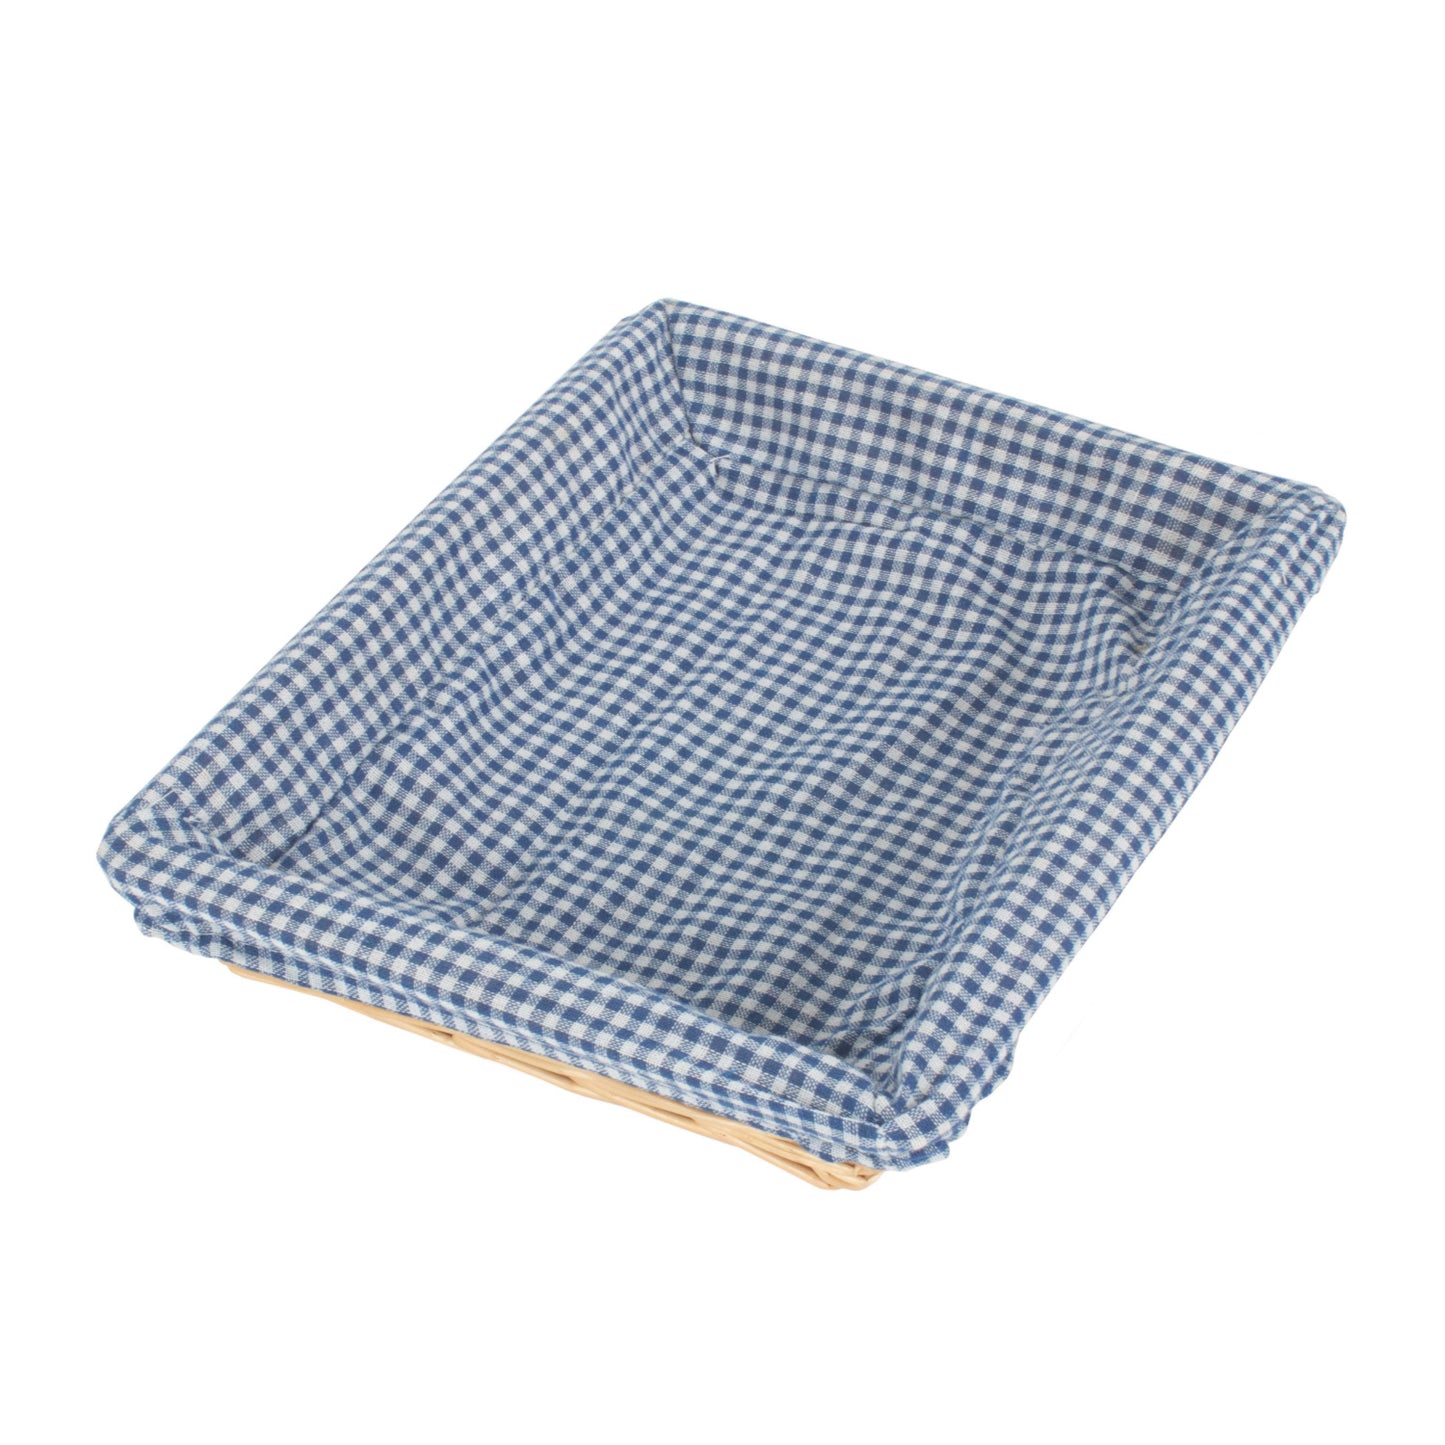 Rectangular Flat Split Willow Tray With Blue & White Checked Lining